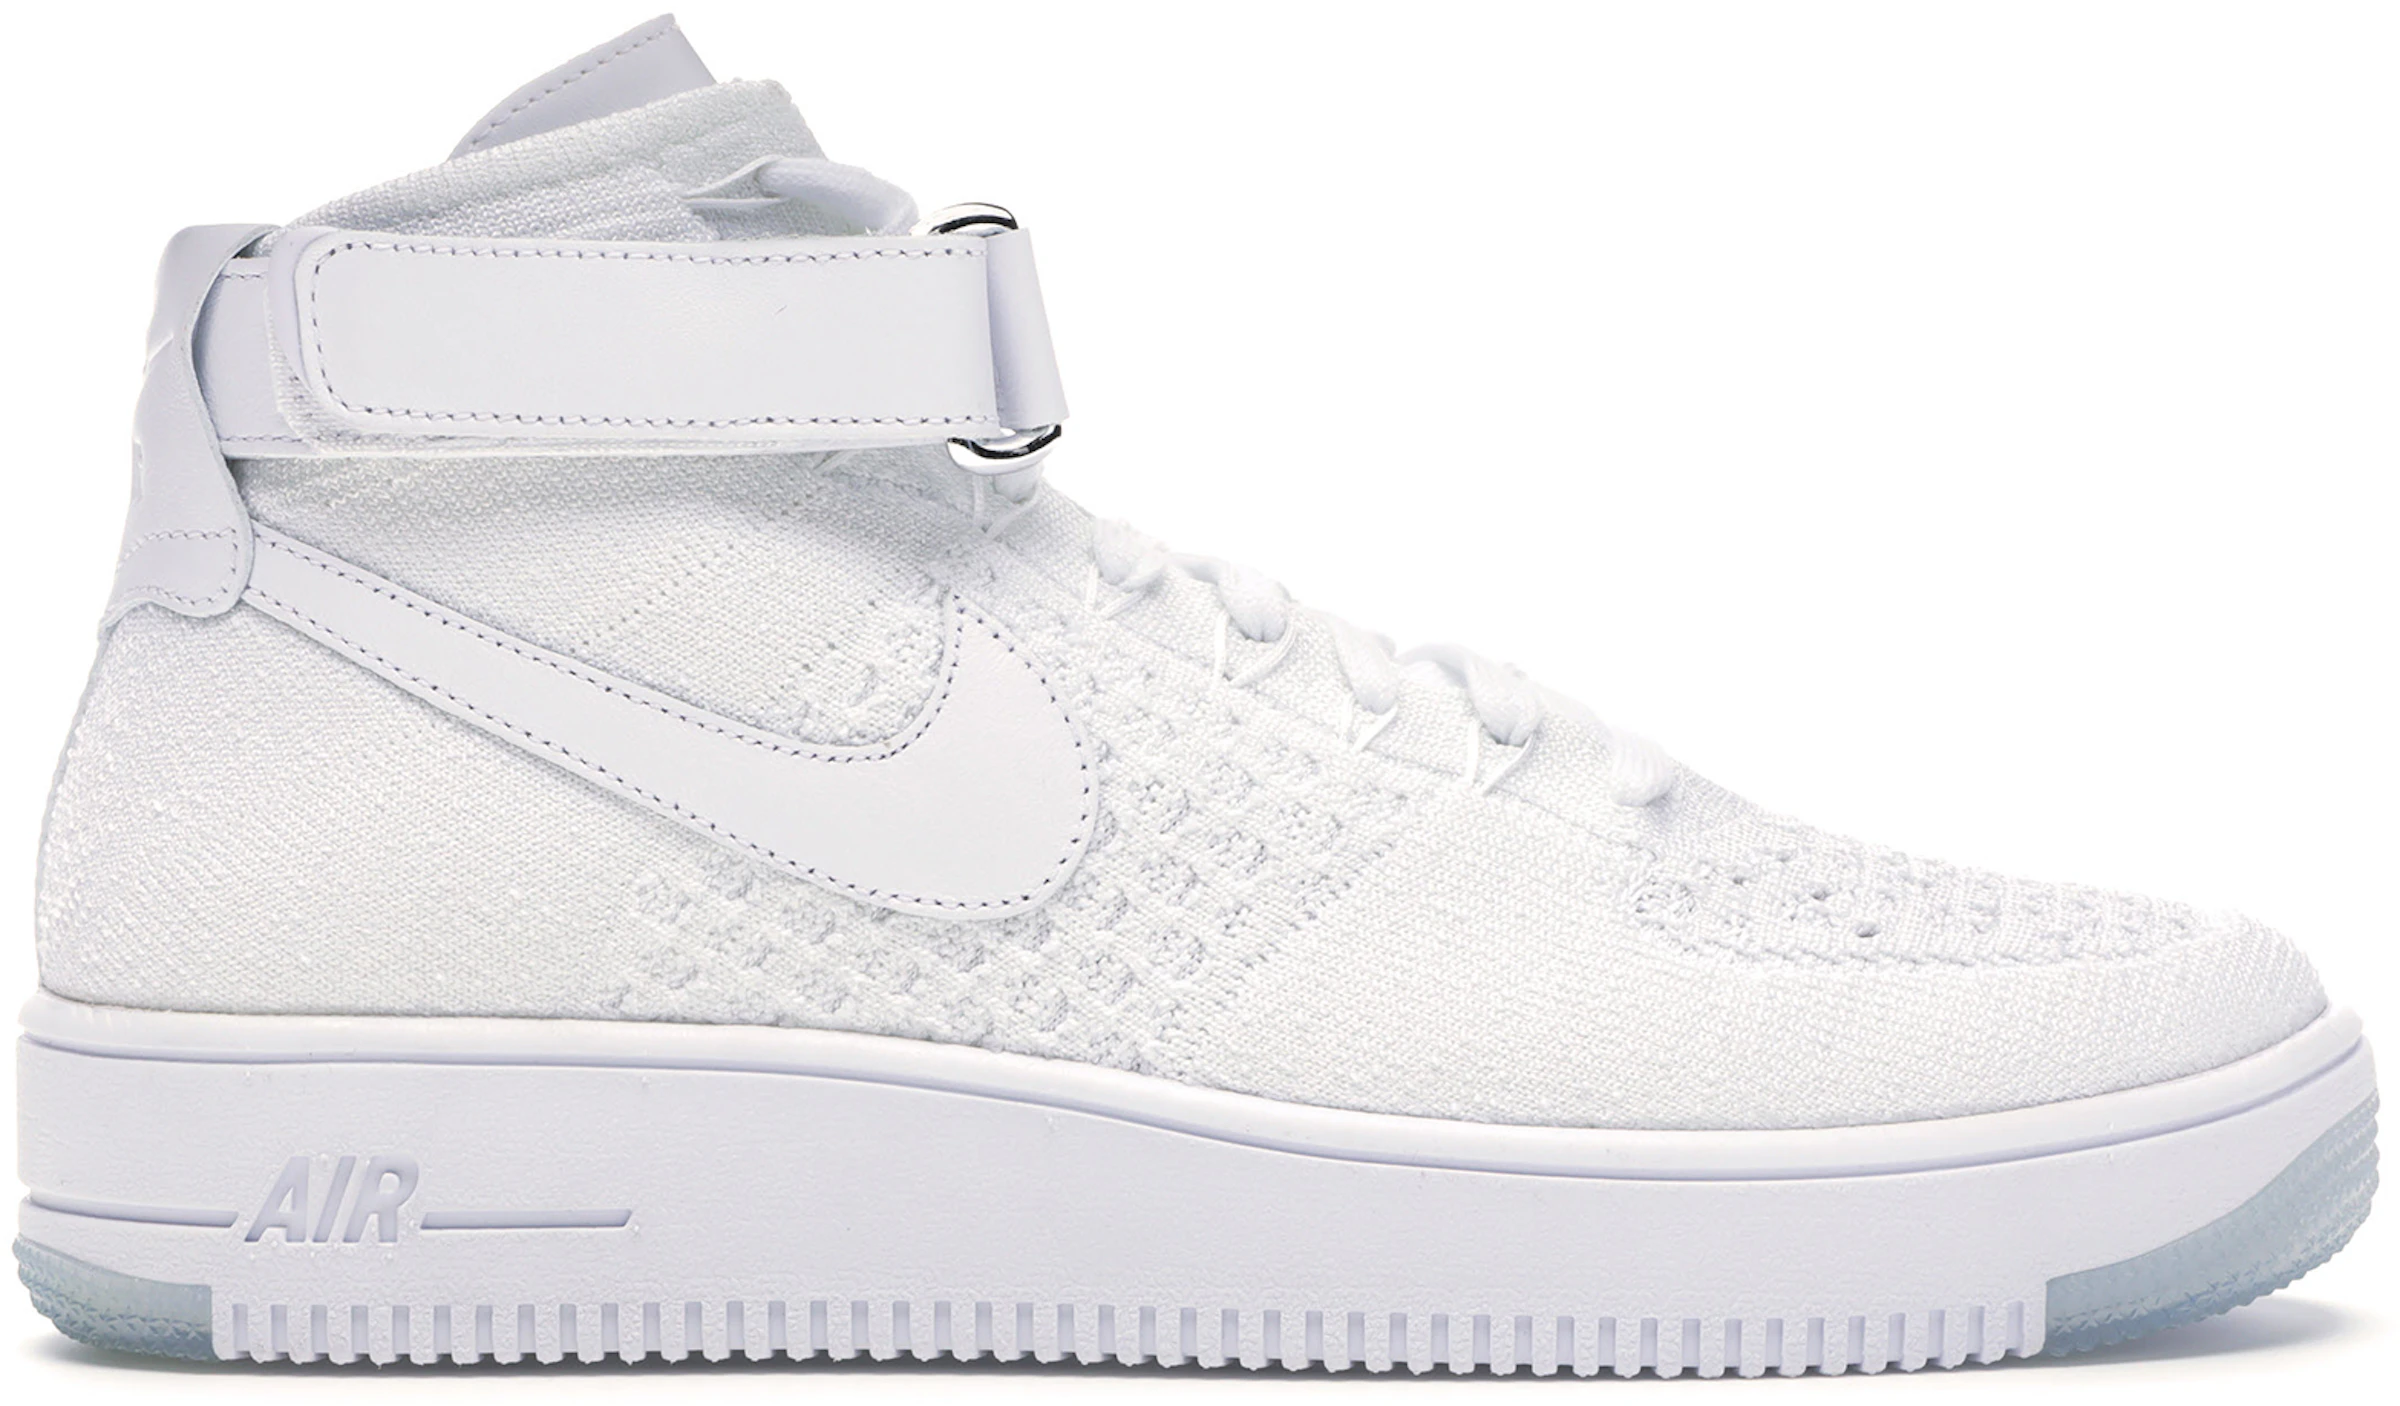 Nike Air Force 1 Flyknit Mid Triple White - 817420-100 -